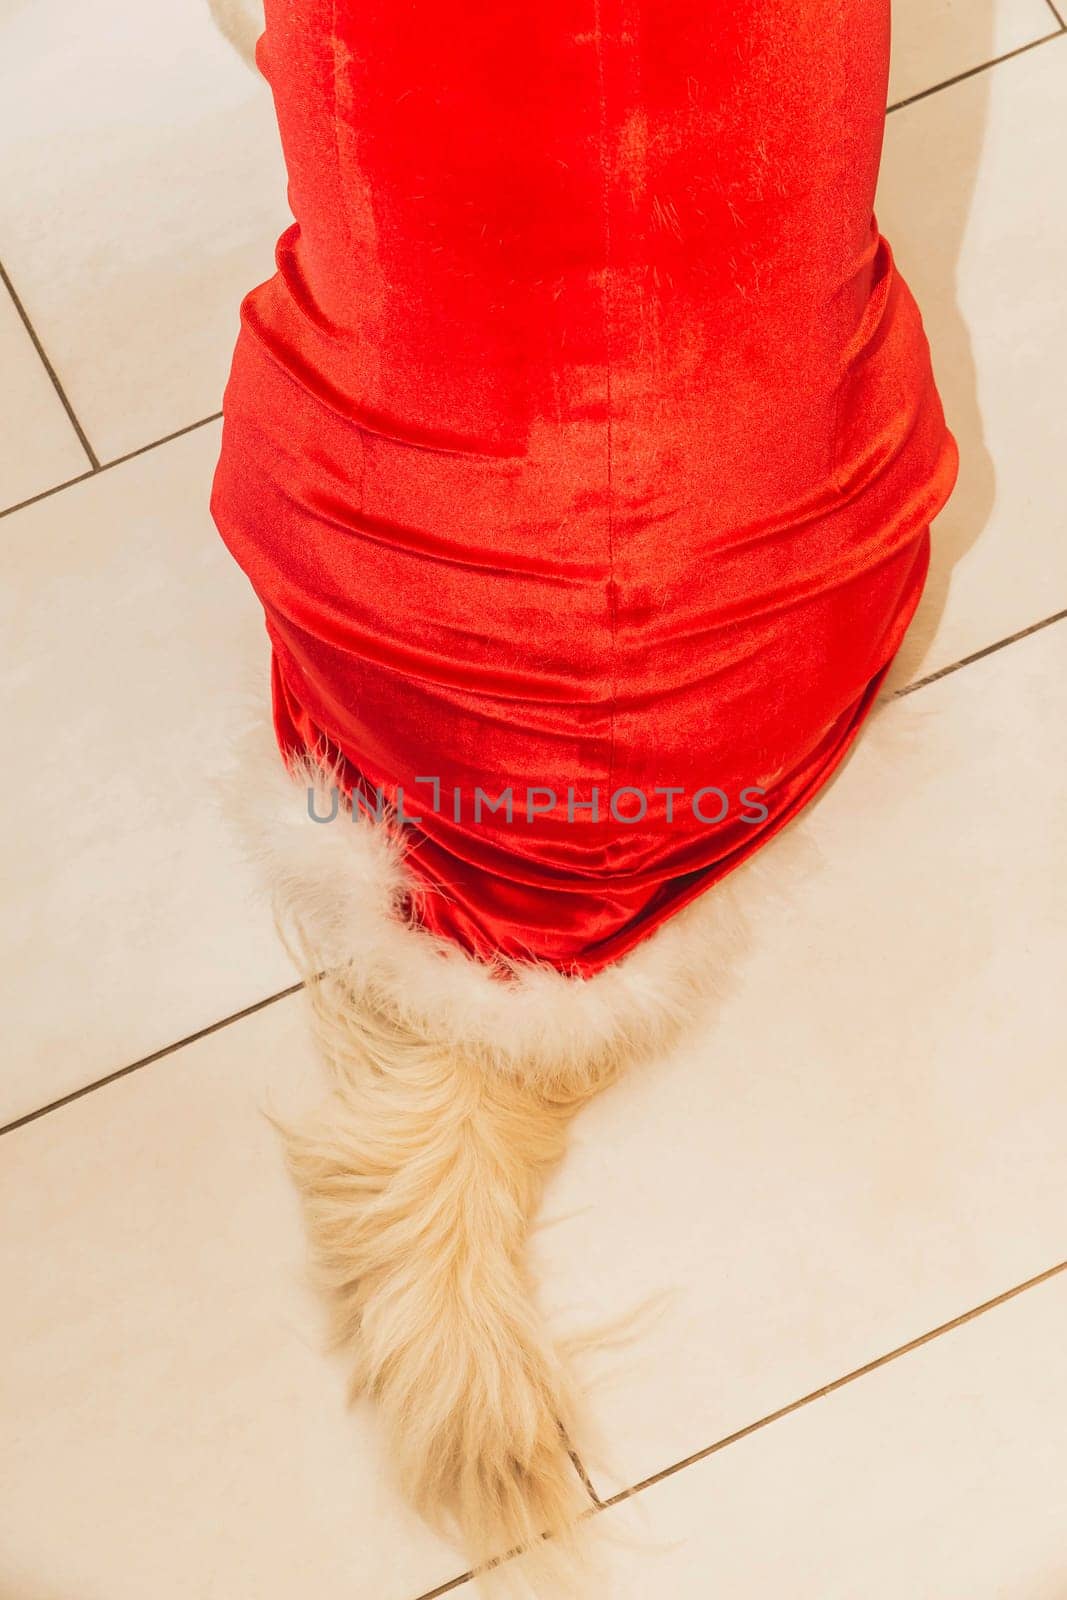 Tail of golden retriever in a red dress by Viktor_Osypenko